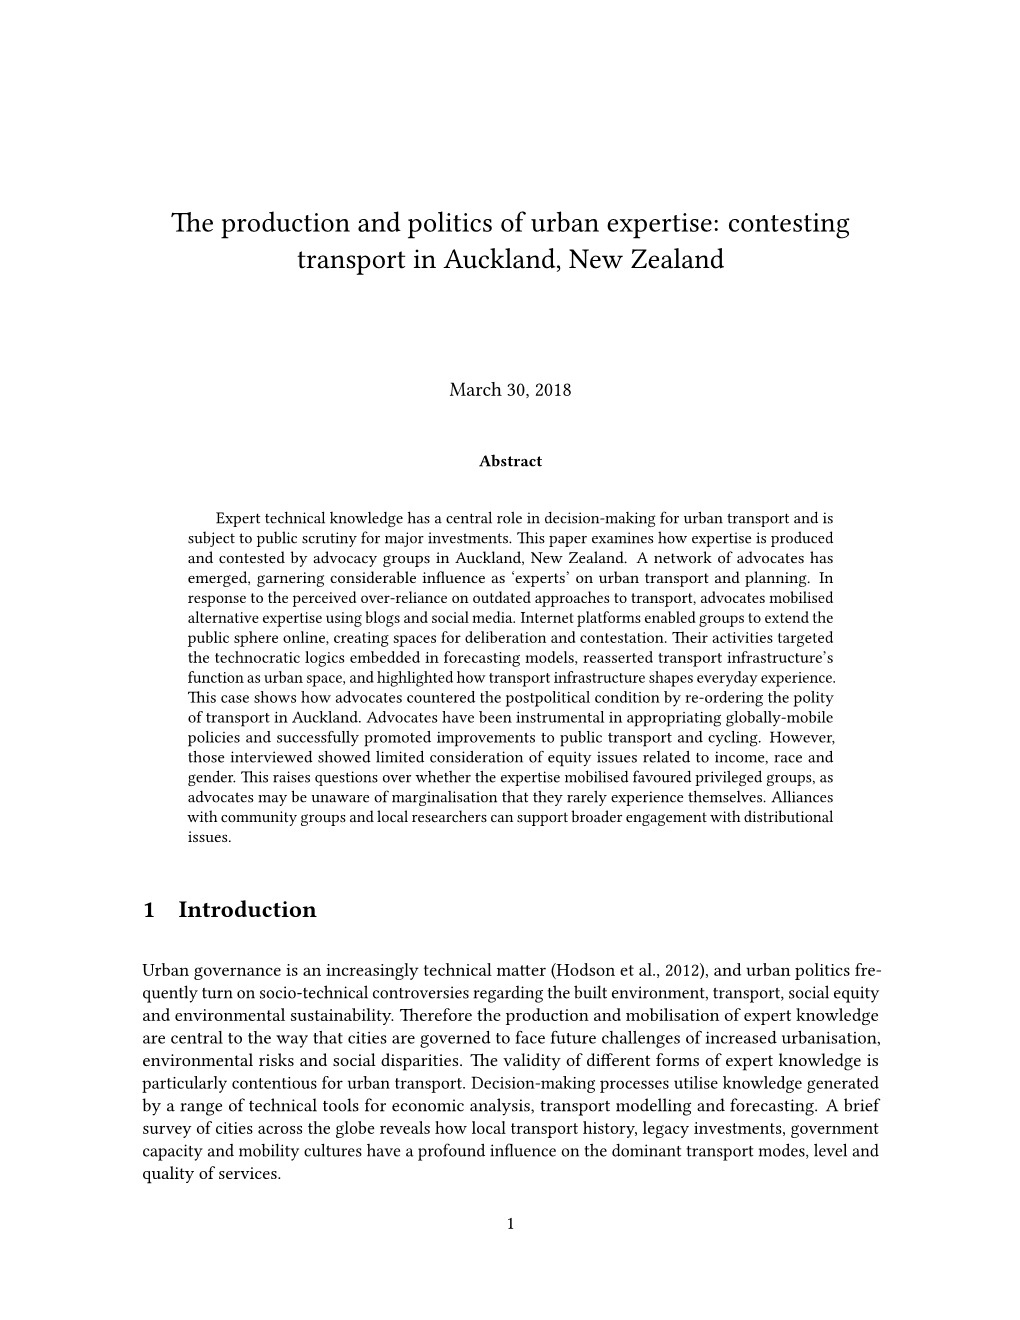 E Production and Politics of Urban Expertise: Contesting Transport in Auckland, New Zealand